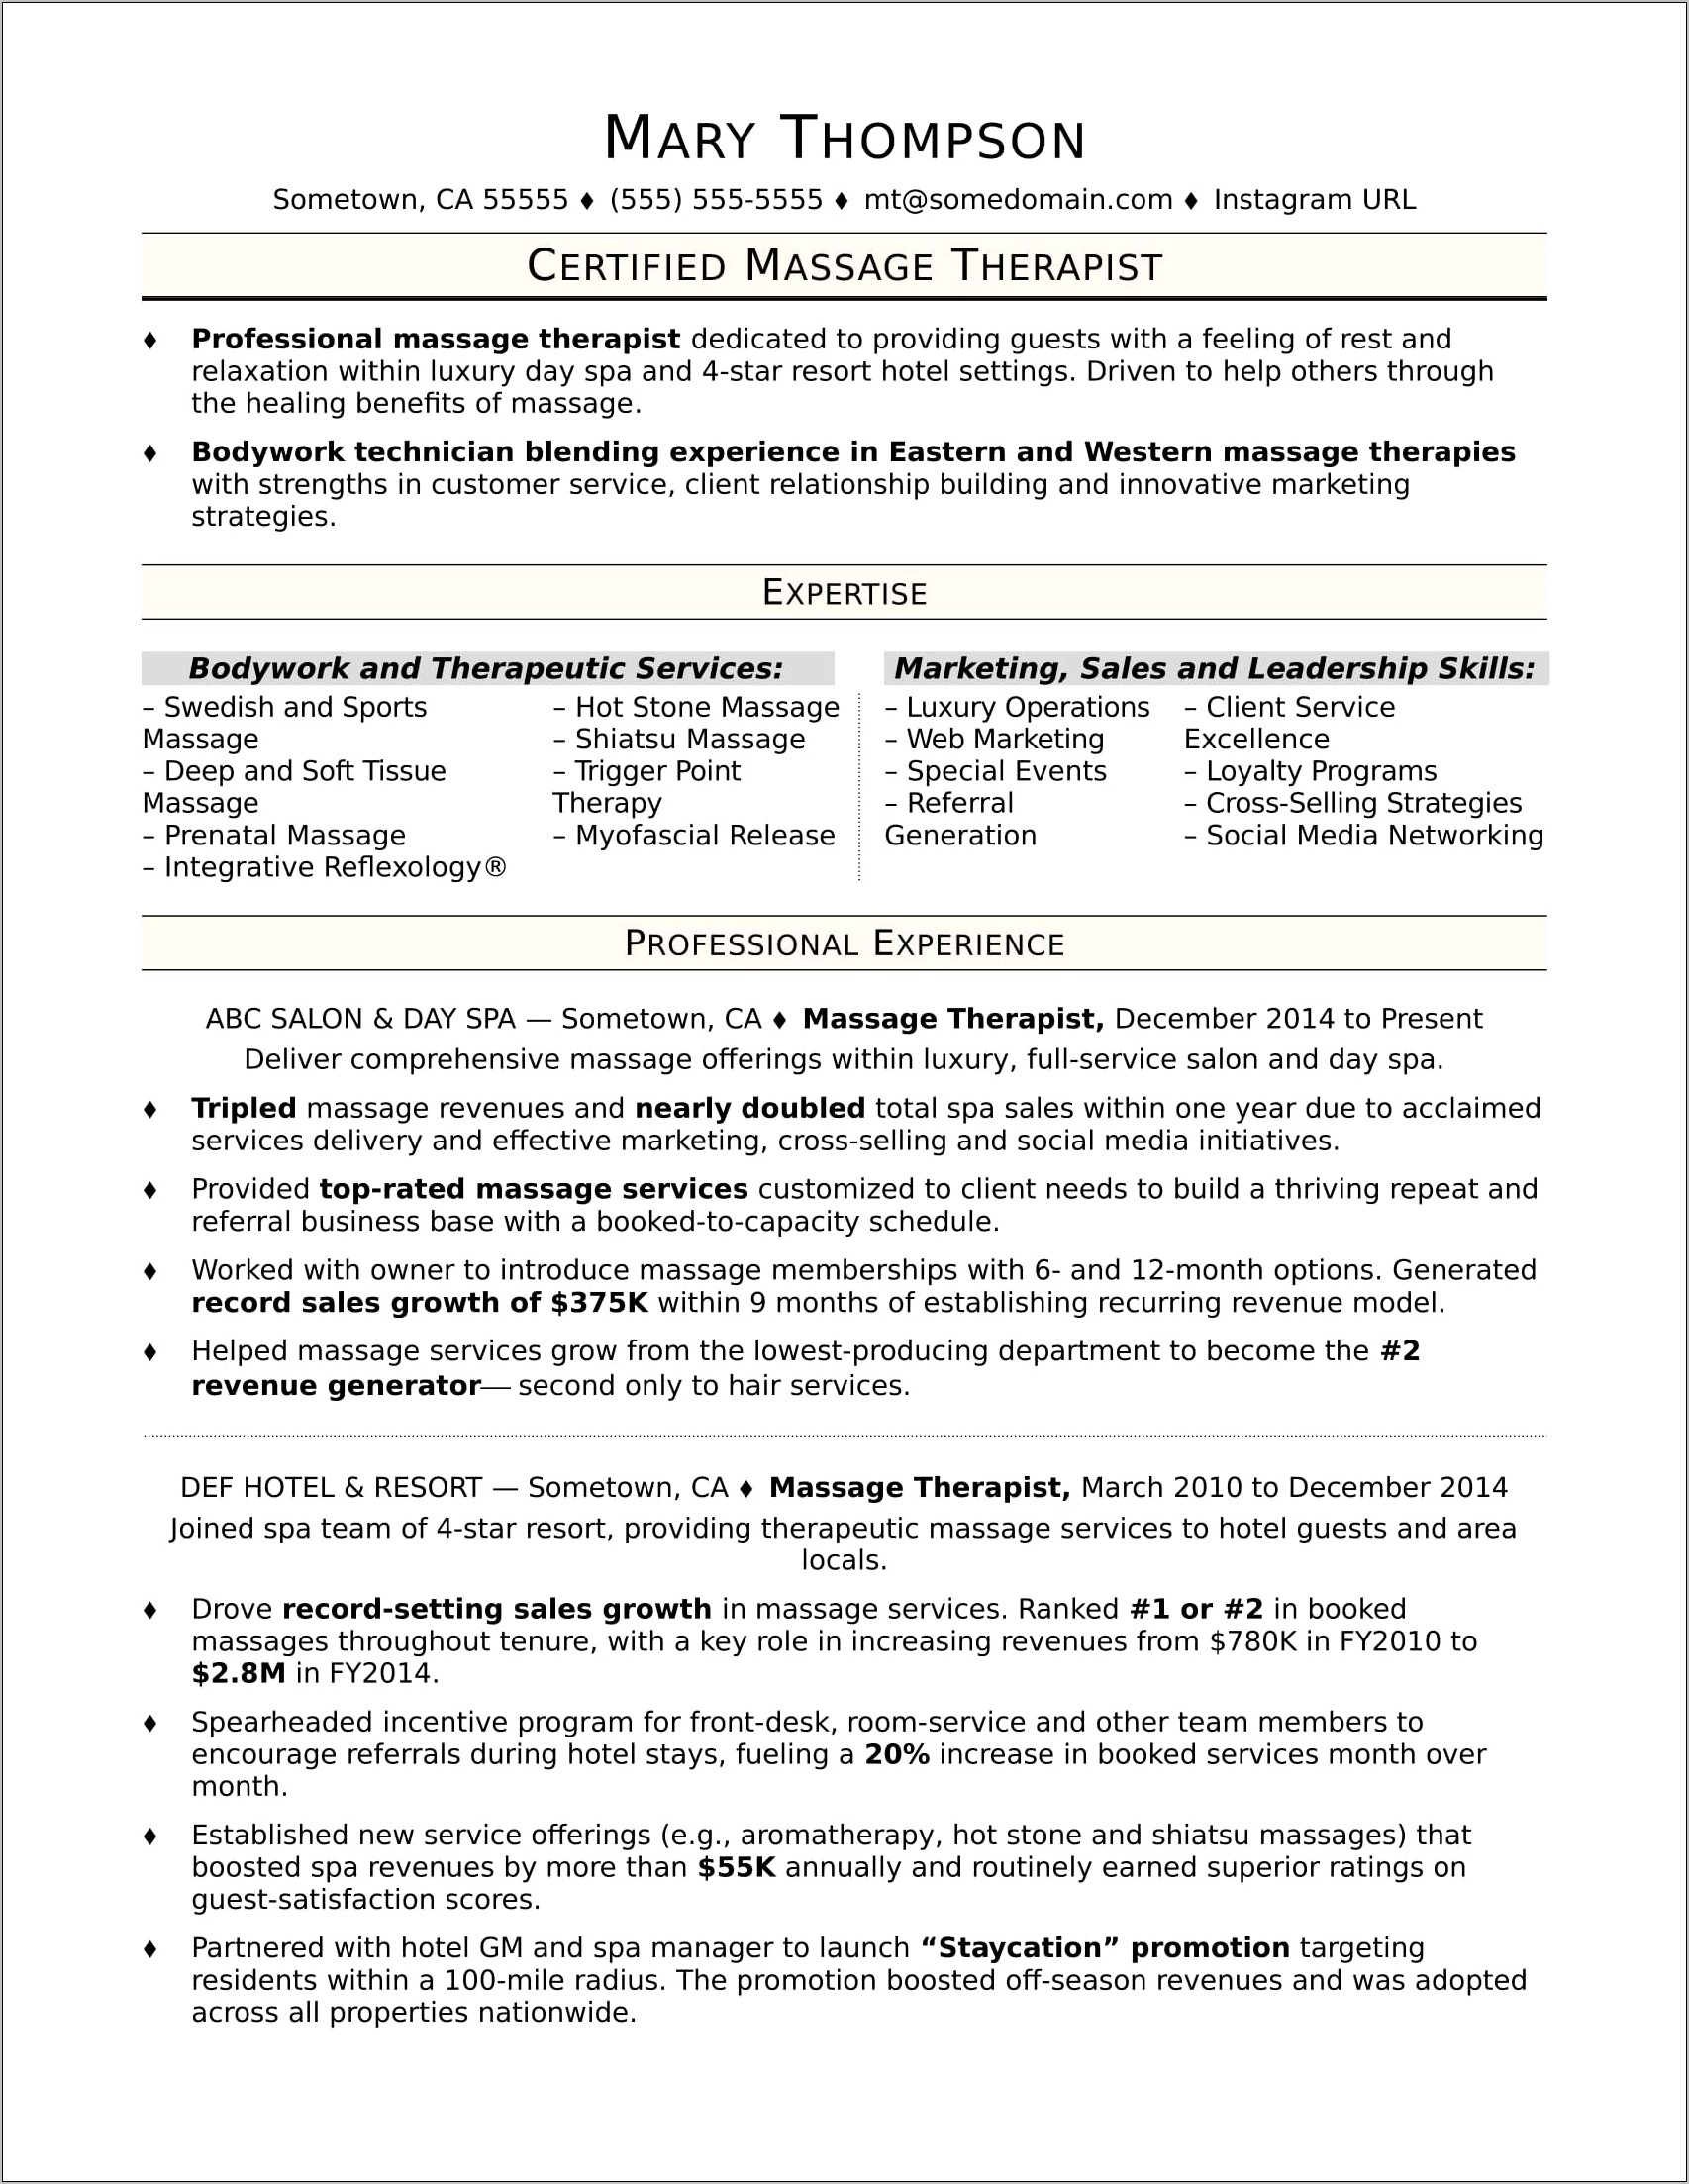 Examples Of Massage Therapy Resume With Managemetn